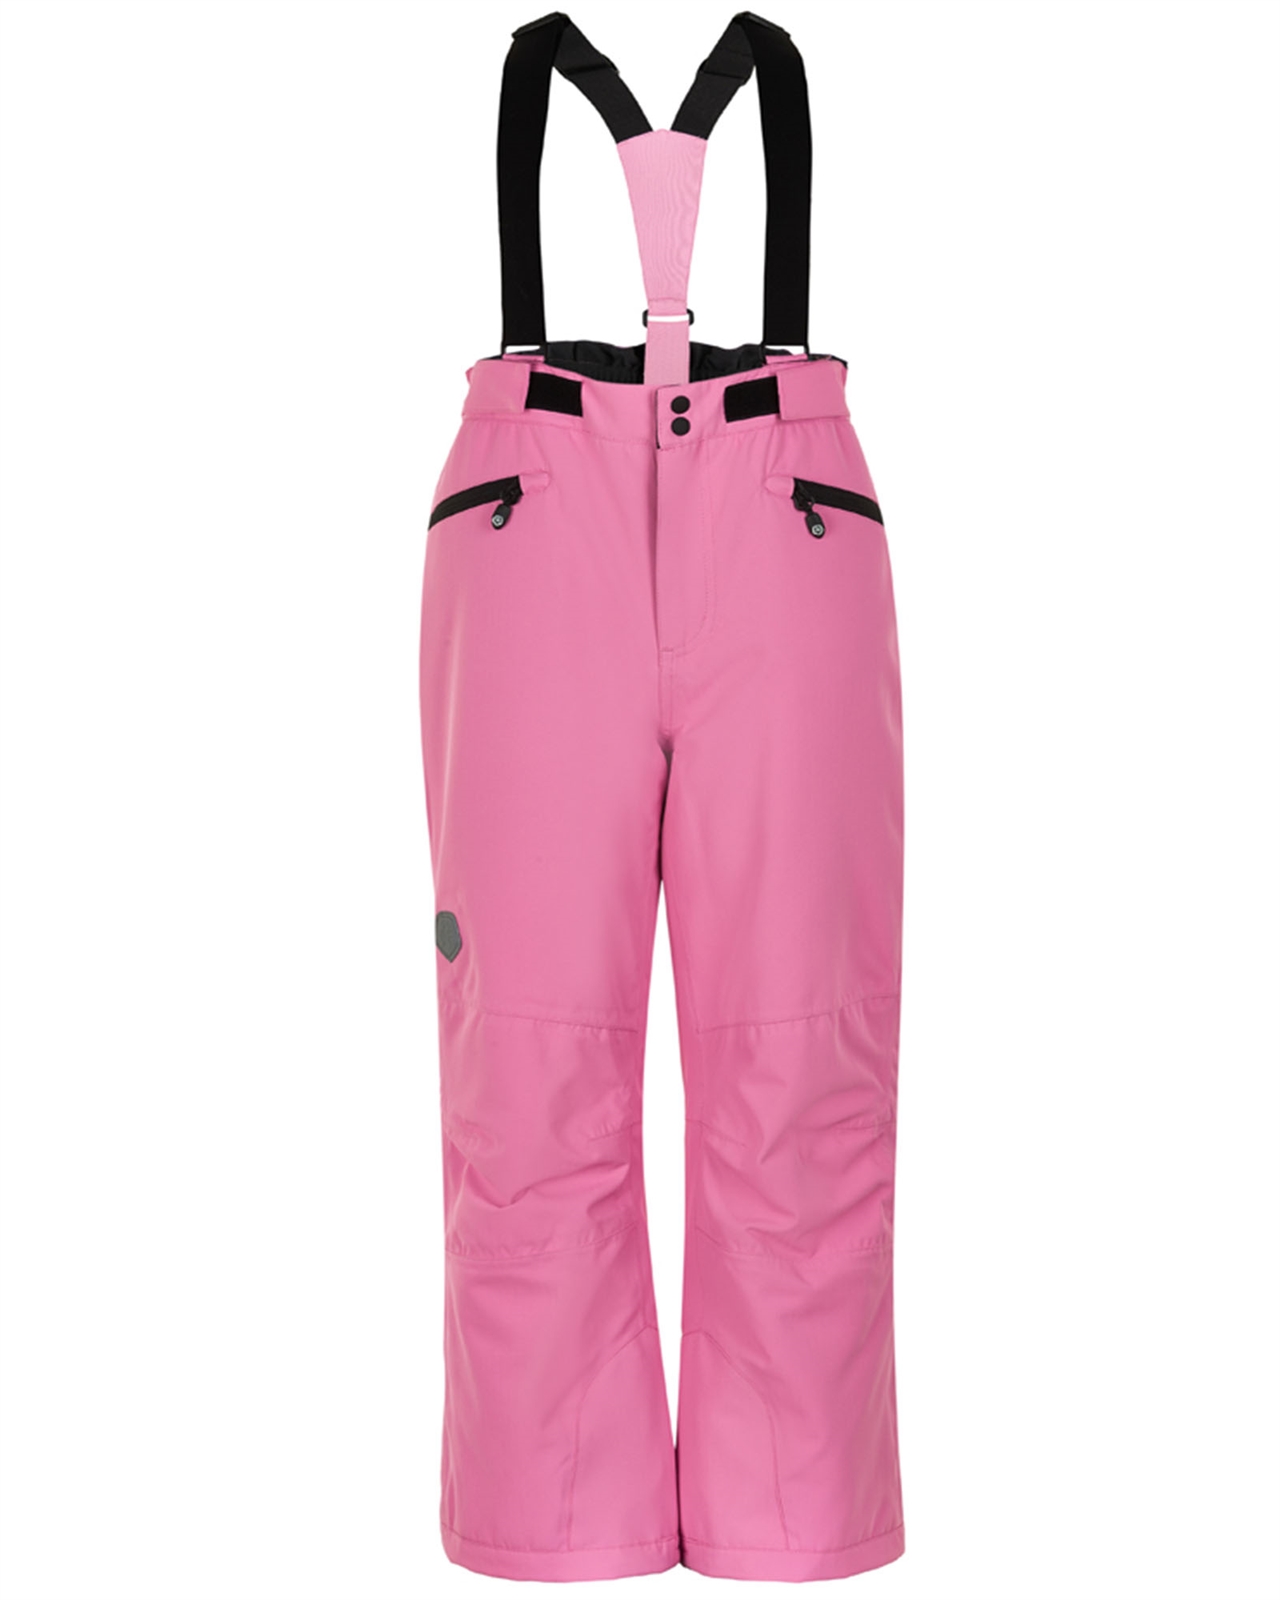 Lands End Pink High Quality Snow Pants size 14 Girls Ski Grow With